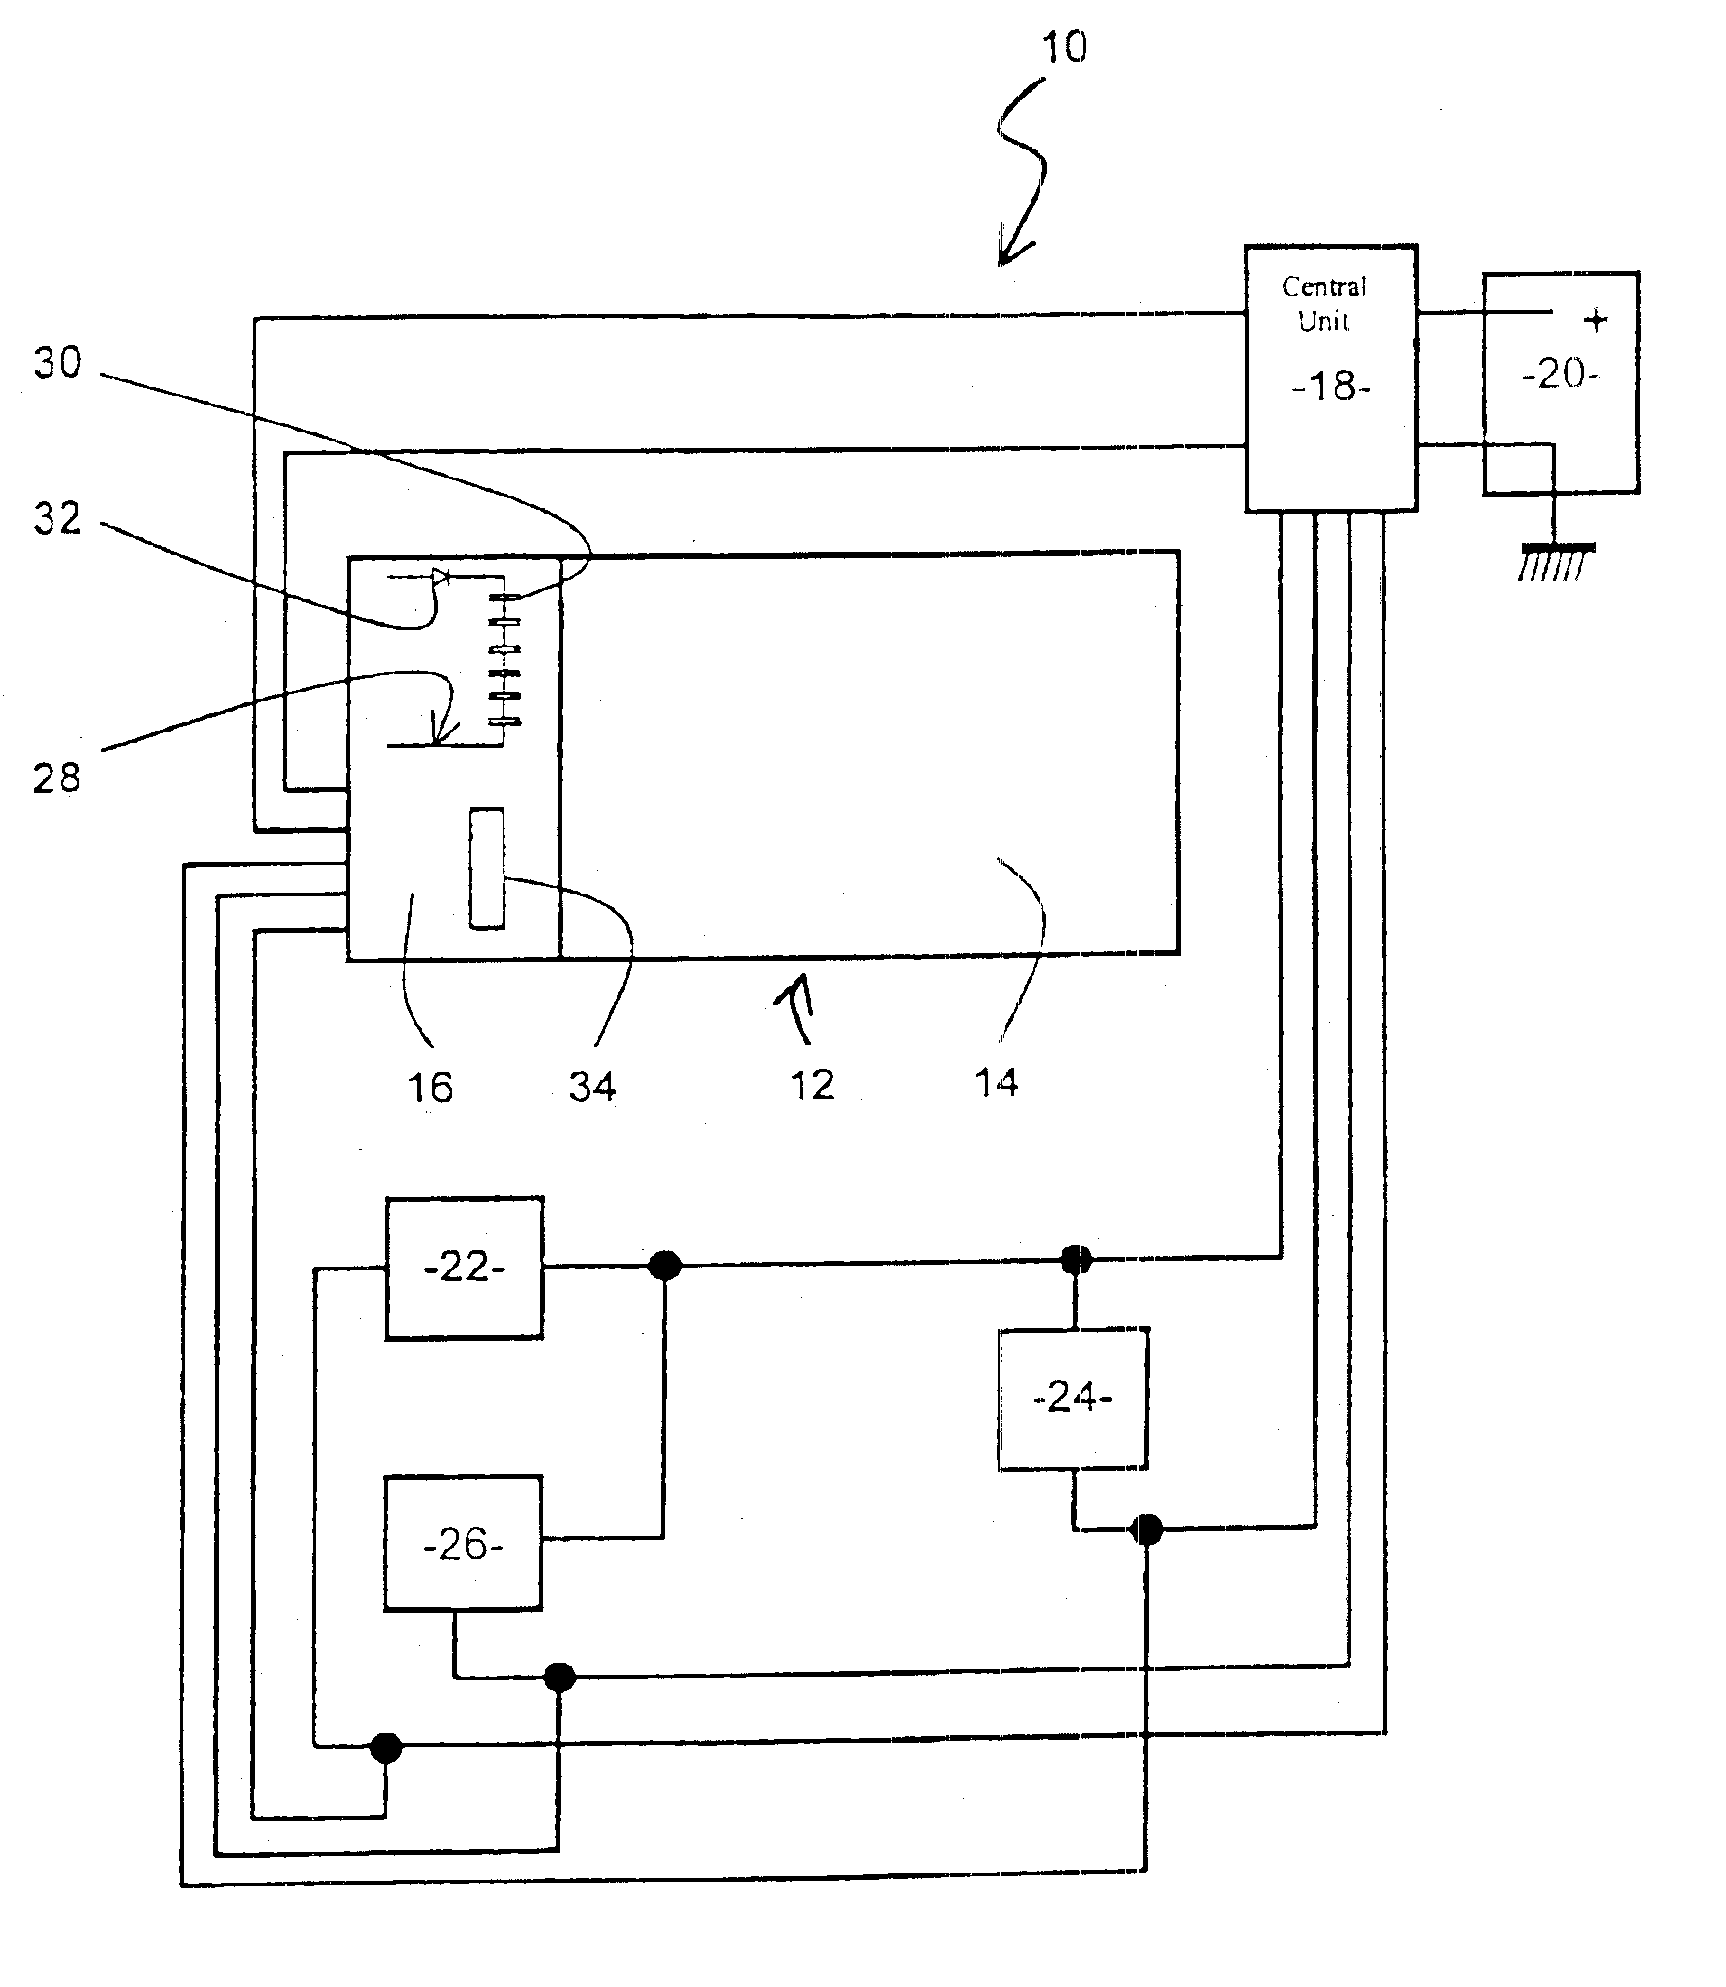 Automobile vehicle door locking assembly and process for testing correct operation of a lock module of this assembly